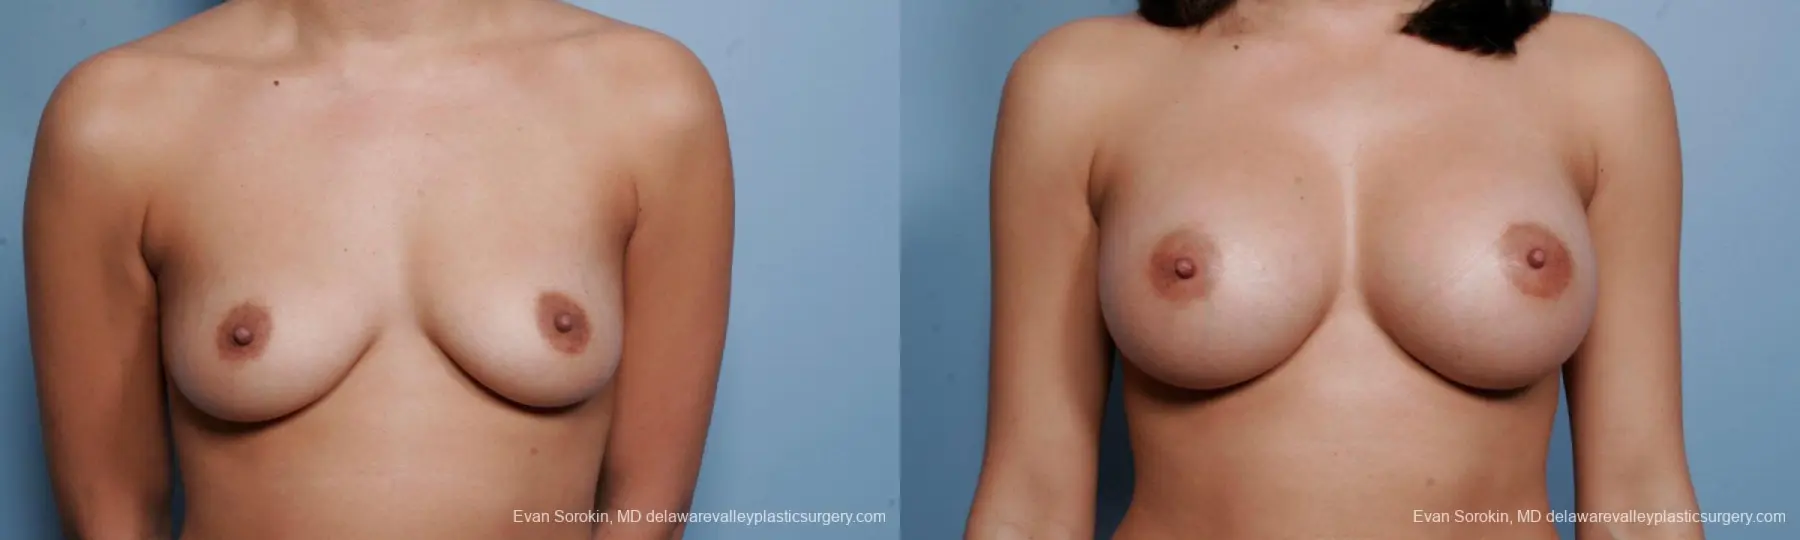 Philadelphia Breast Augmentation 9373 - Before and After 1